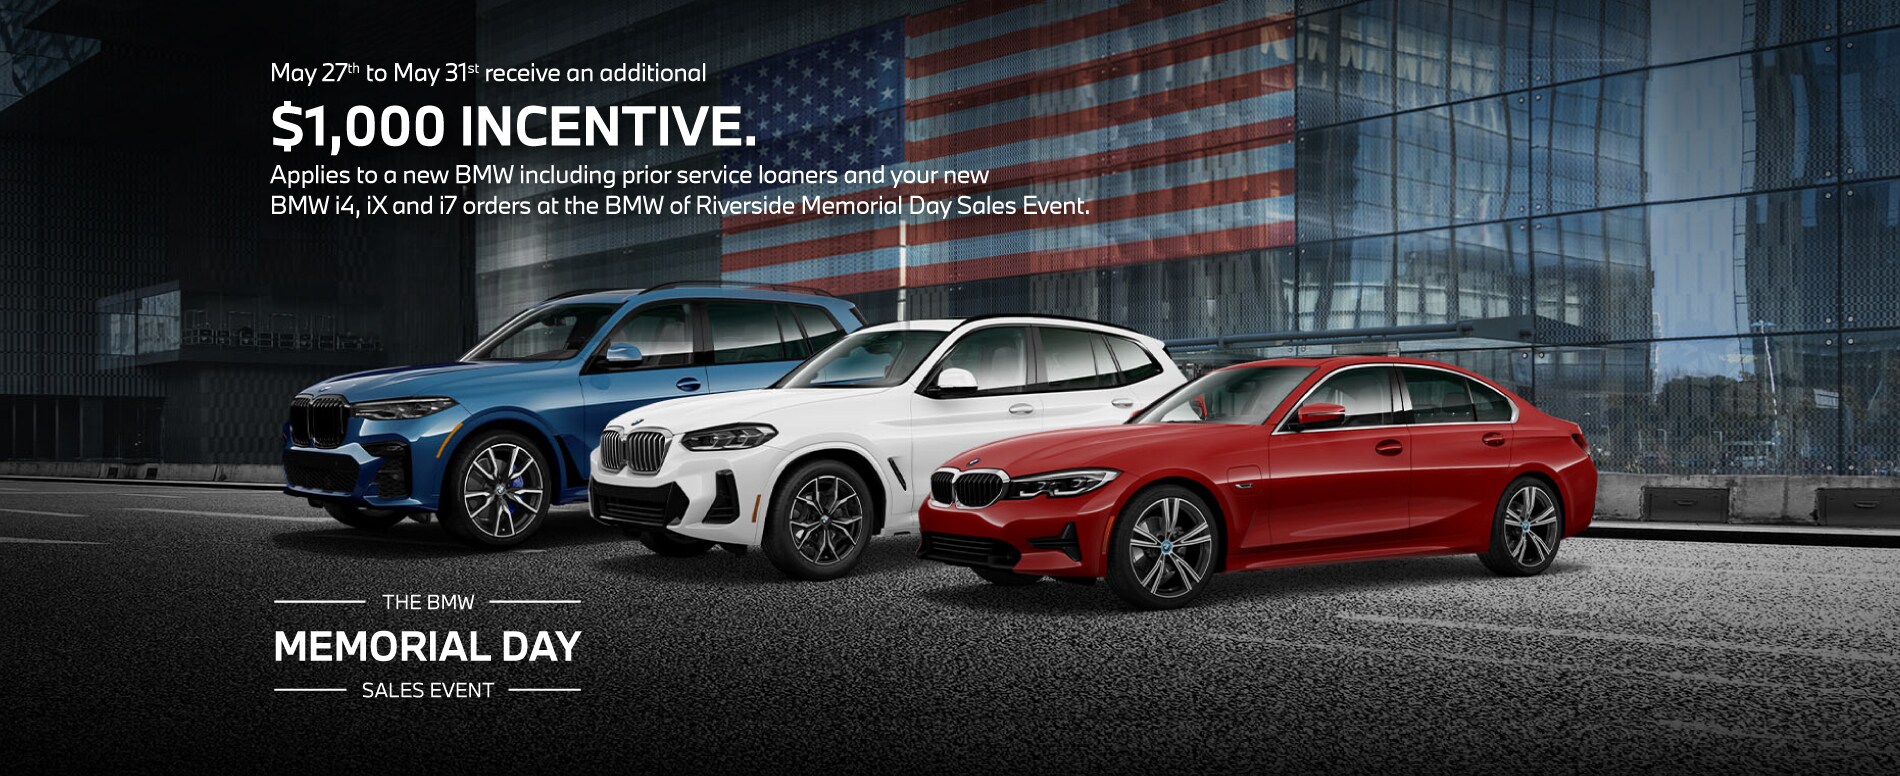 Memorial Day Sales Event BMW of Riverside